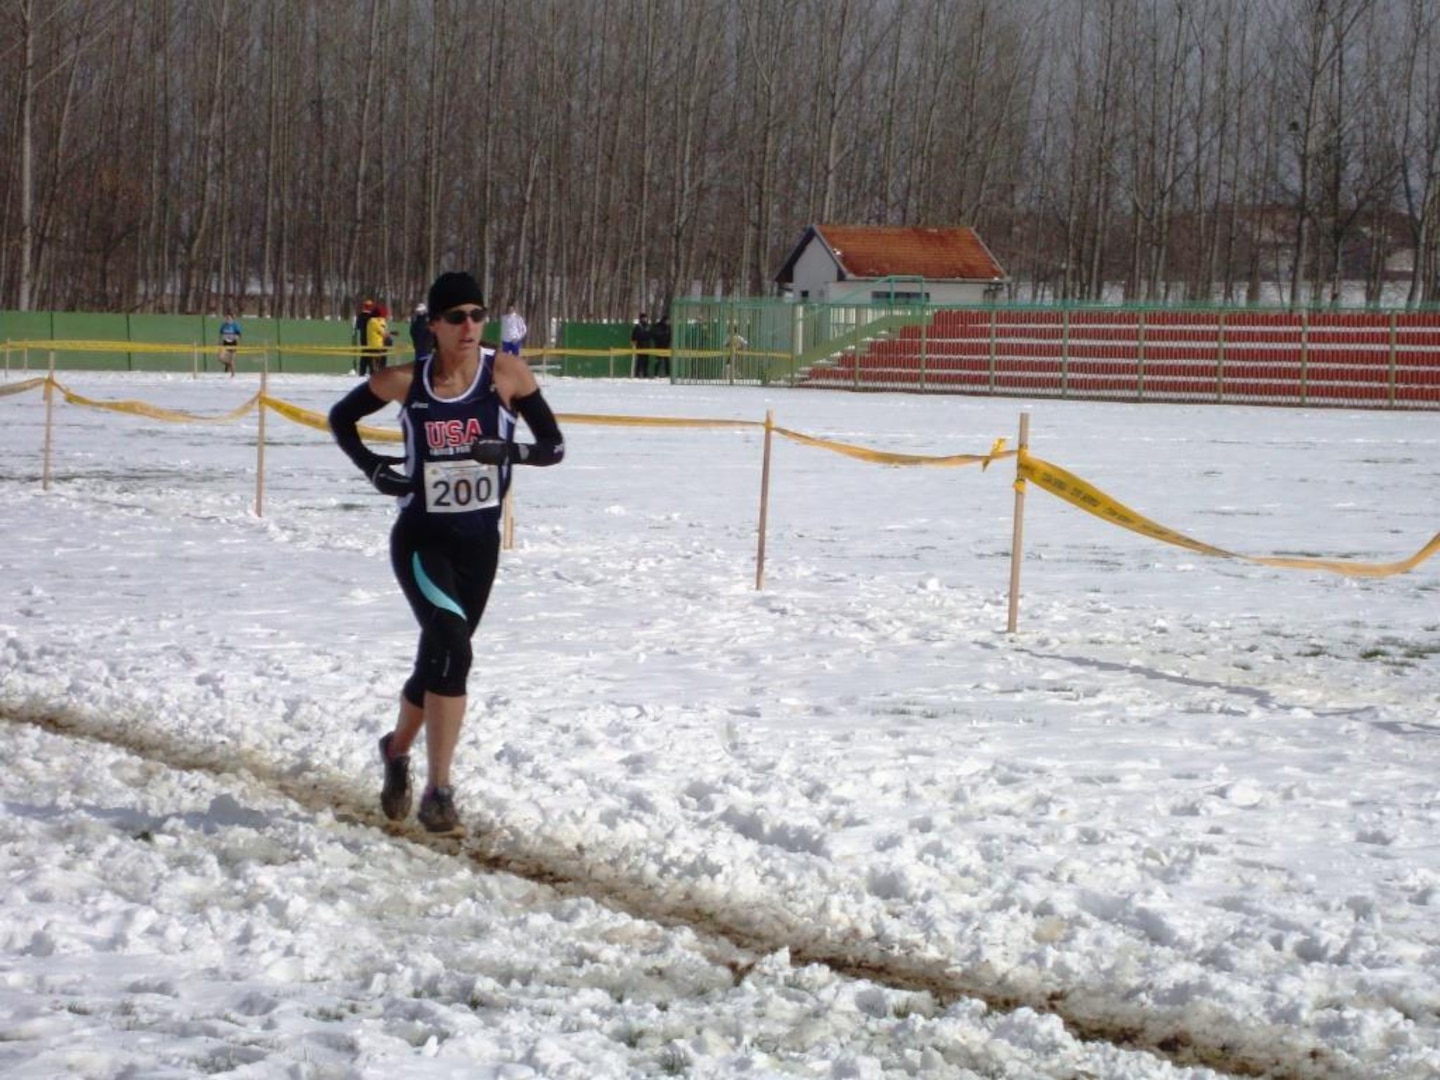 Navy lieutenant Gina Slaby (Naval Base Norfolk, VA) competing in the 2013 CISM World Military Cross Country Championship in Apatin, Serbia on 16 March 2013